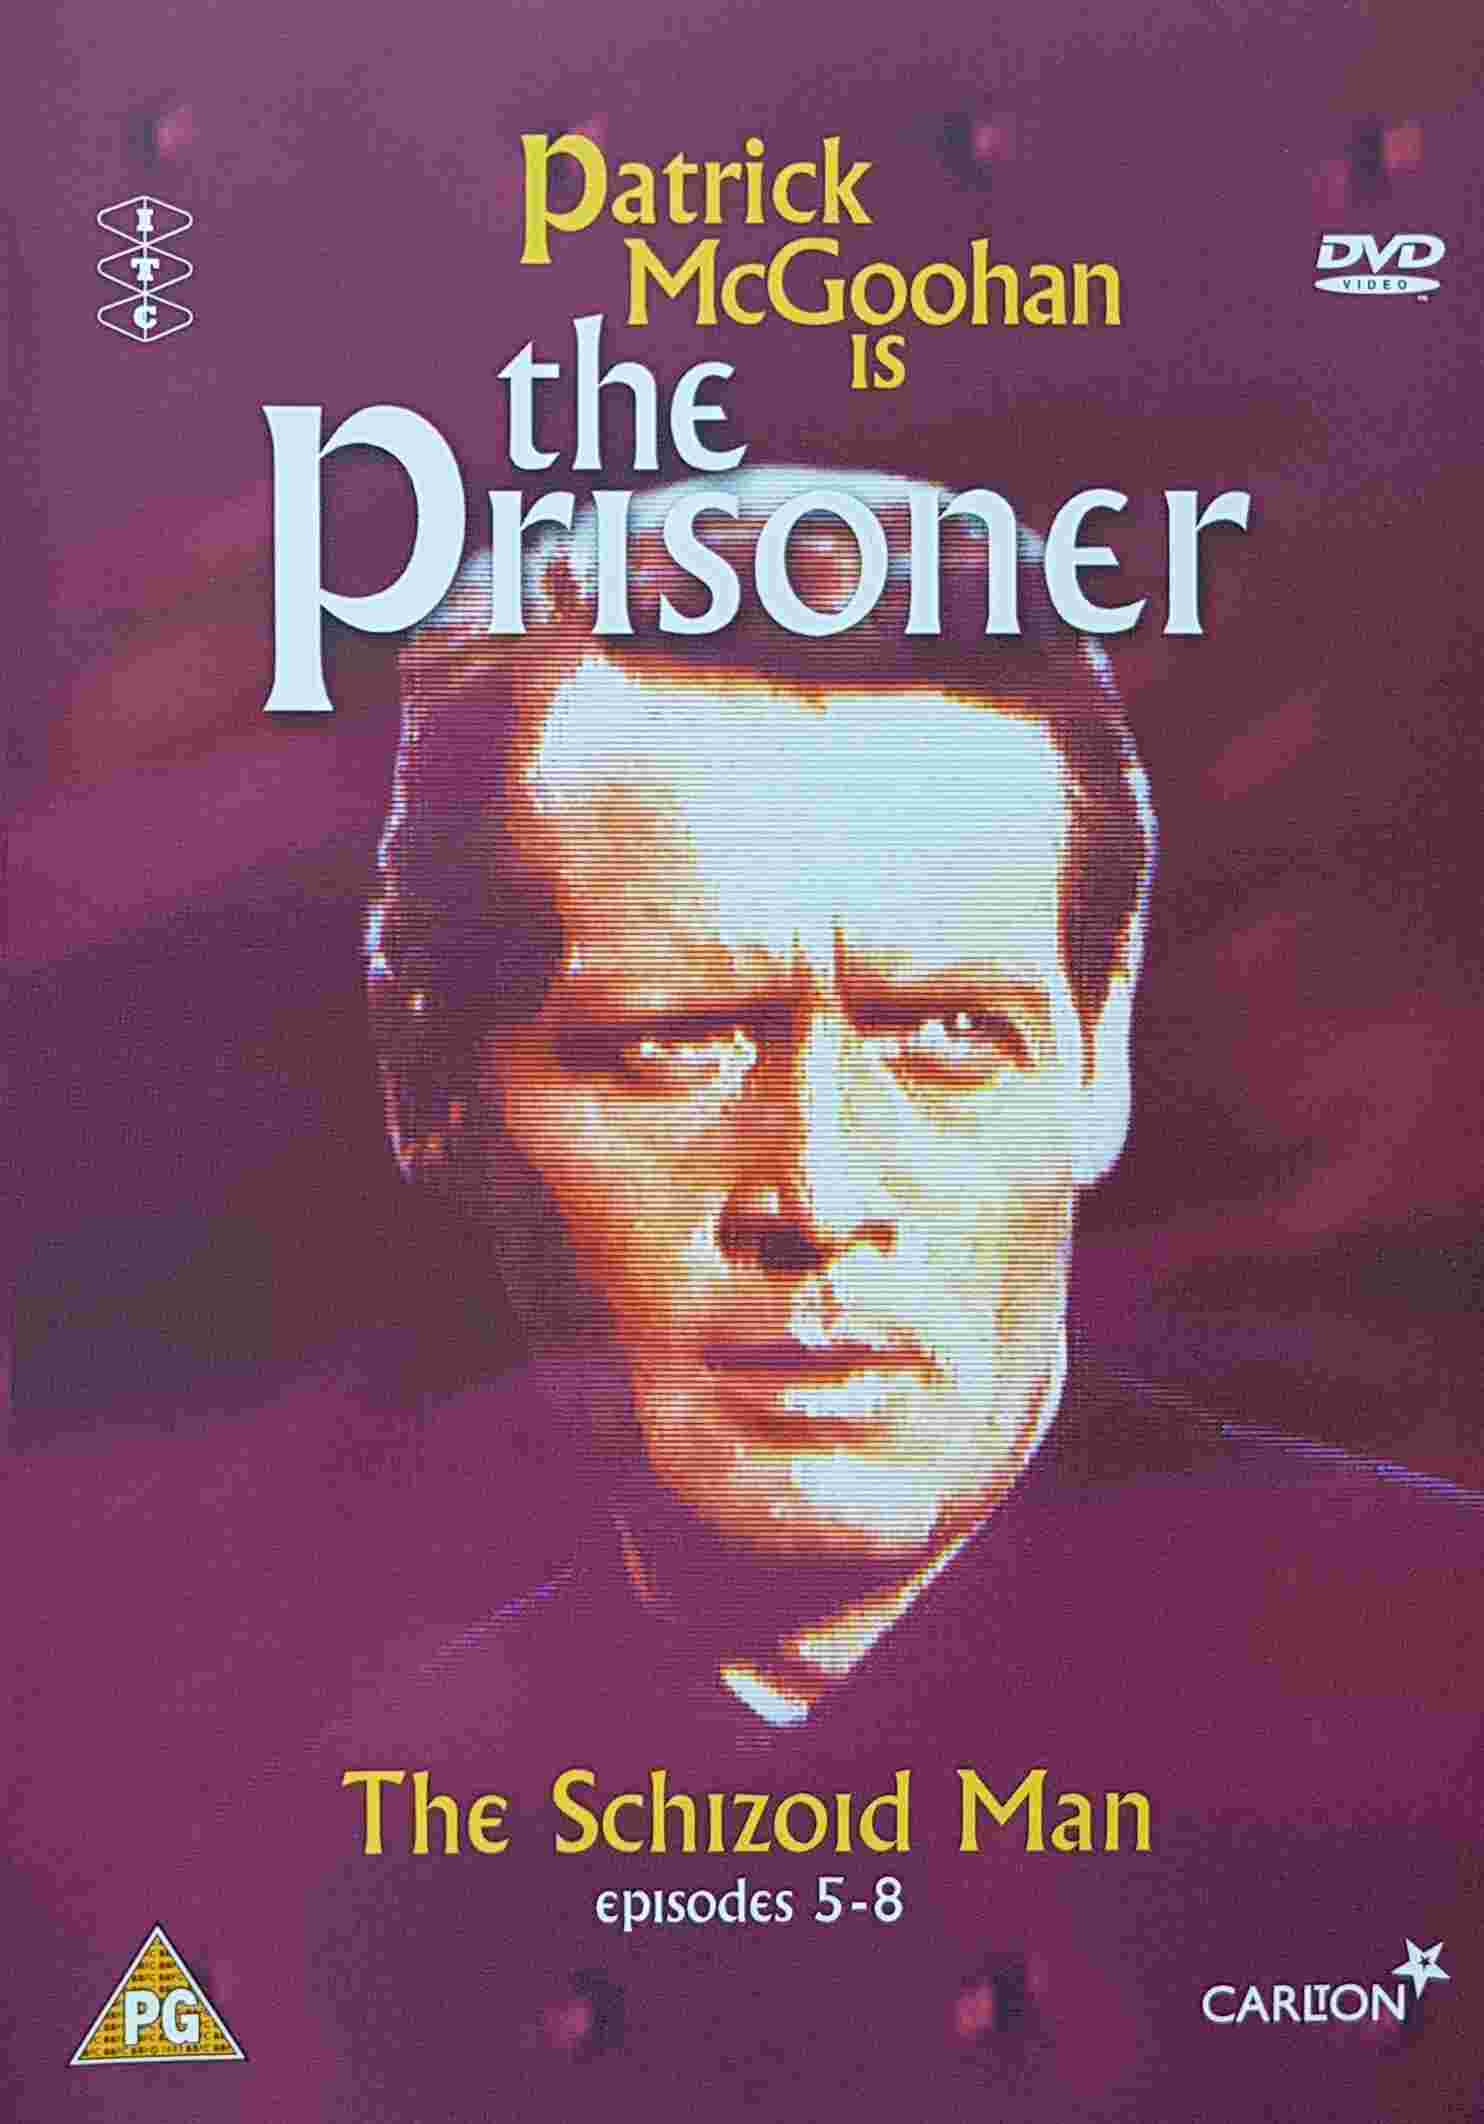 Picture of The prisoner - Episodes 5 - 8 by artist Various from ITV, Channel 4 and Channel 5 dvds library